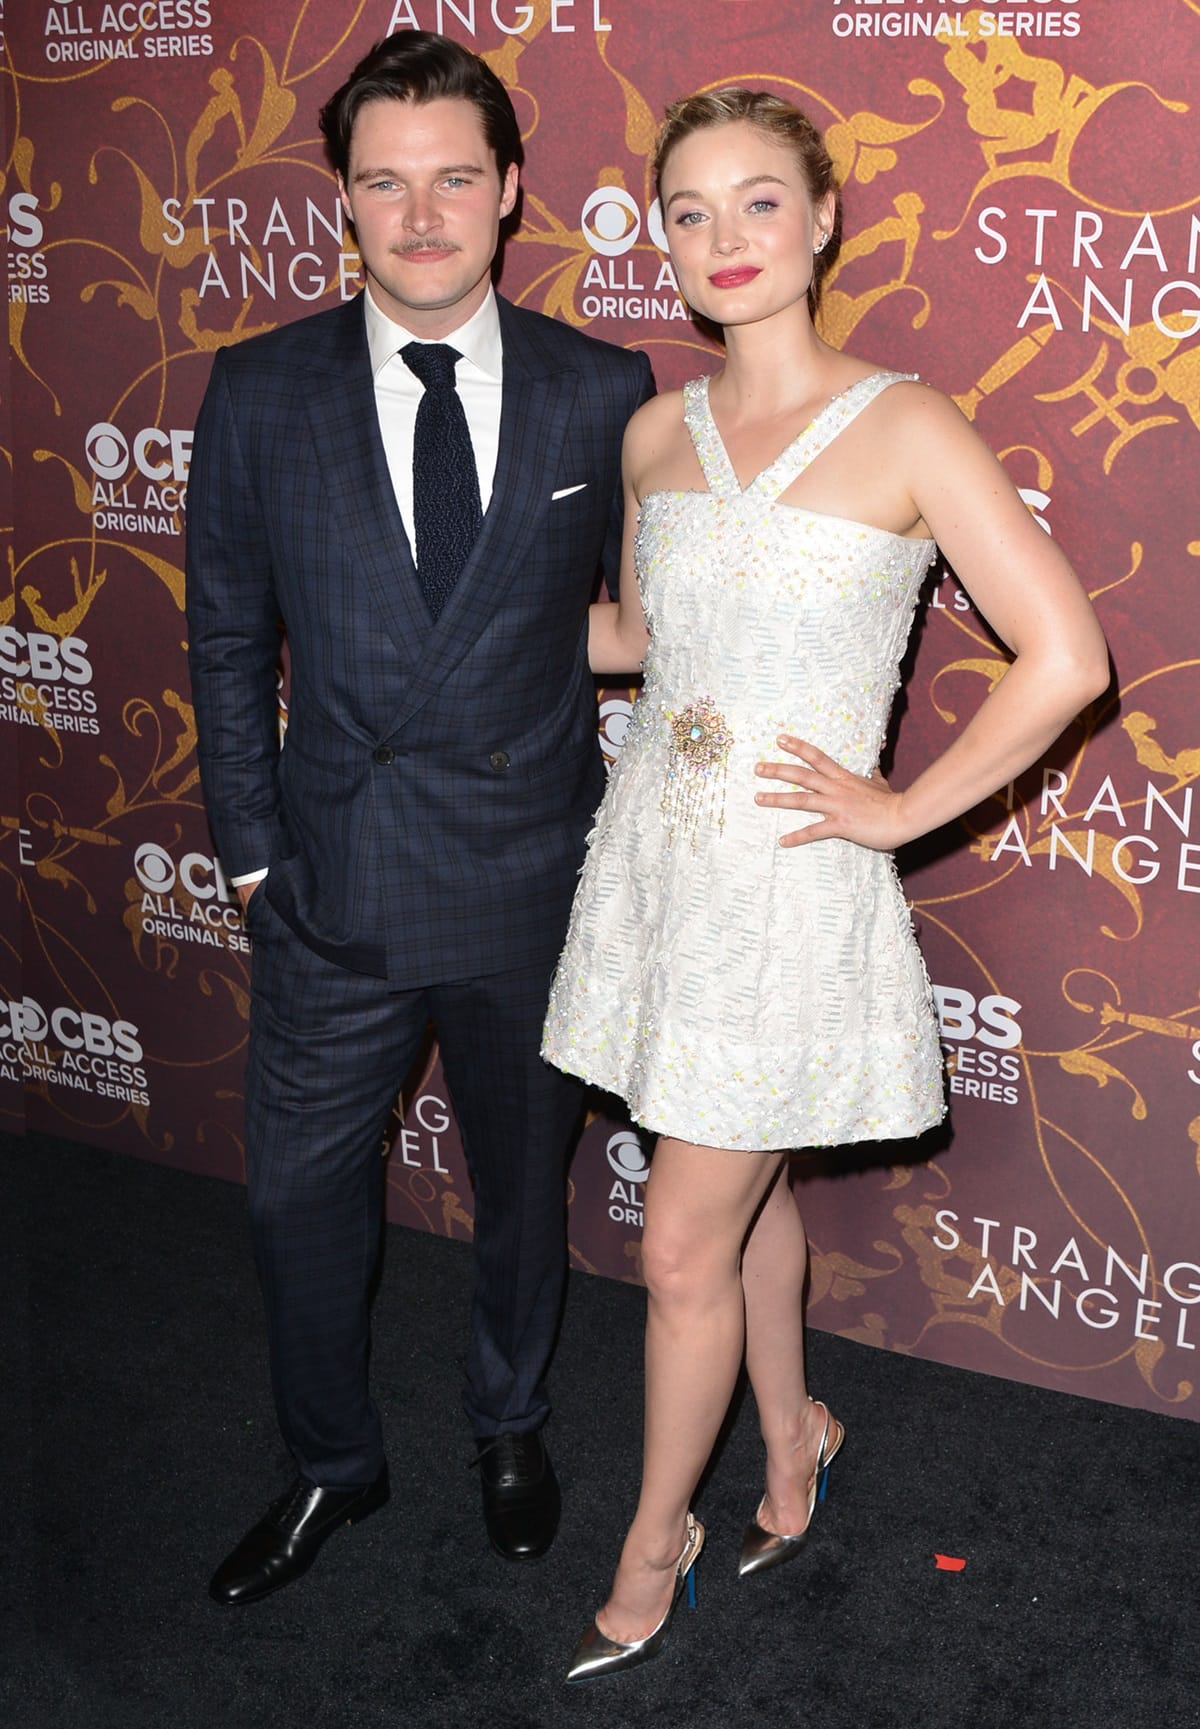 At a height of 5 feet 11 inches (180.3 cm), Jack Reynor, alongside the 5 feet 6 inches (167.6 cm) tall Bella Heathcote, attended the premiere of 'Strange Angel' at Avalon